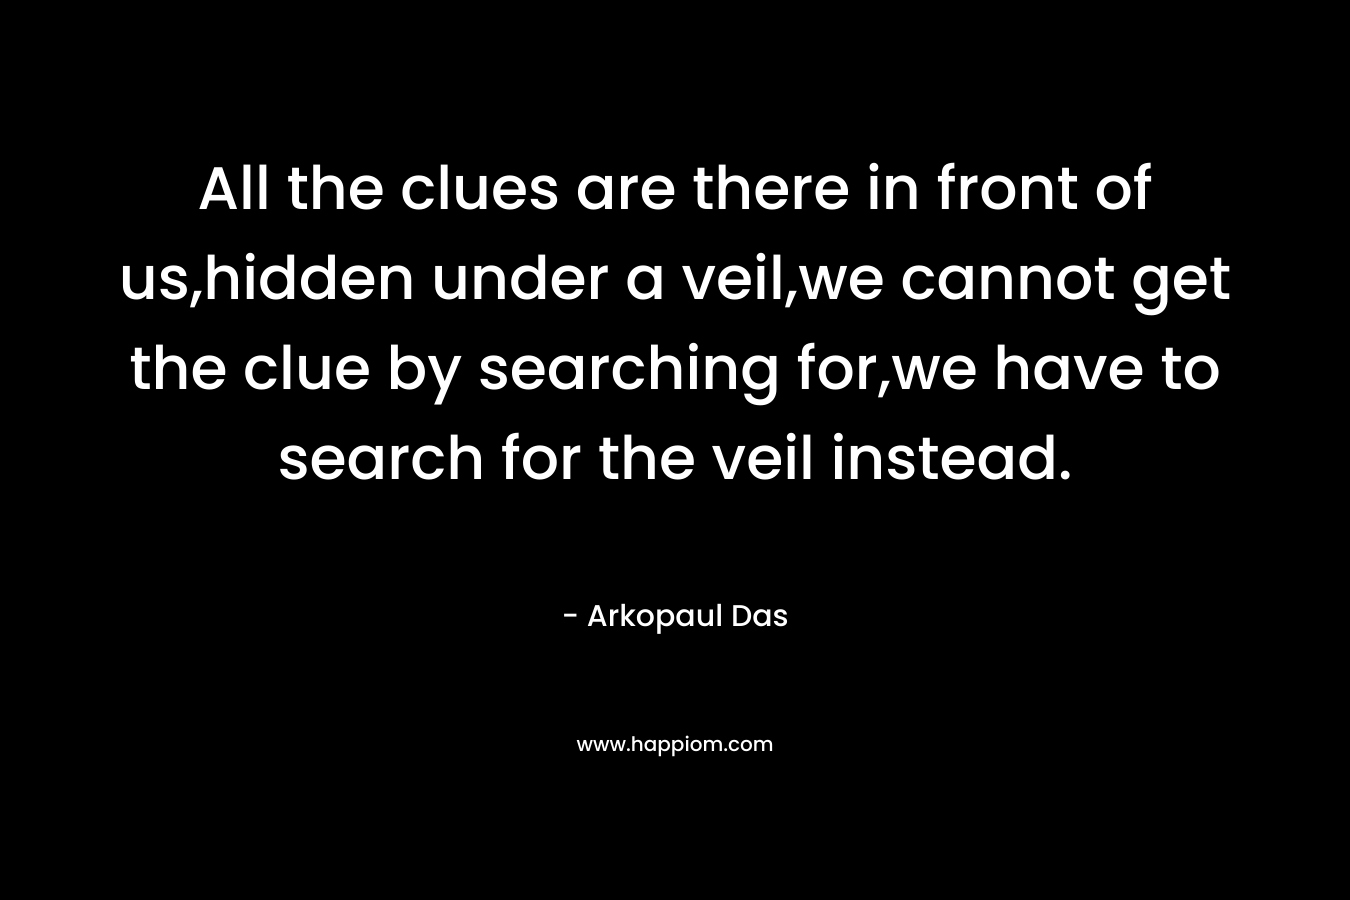 All the clues are there in front of us,hidden under a veil,we cannot get the clue by searching for,we have to search for the veil instead. – Arkopaul Das